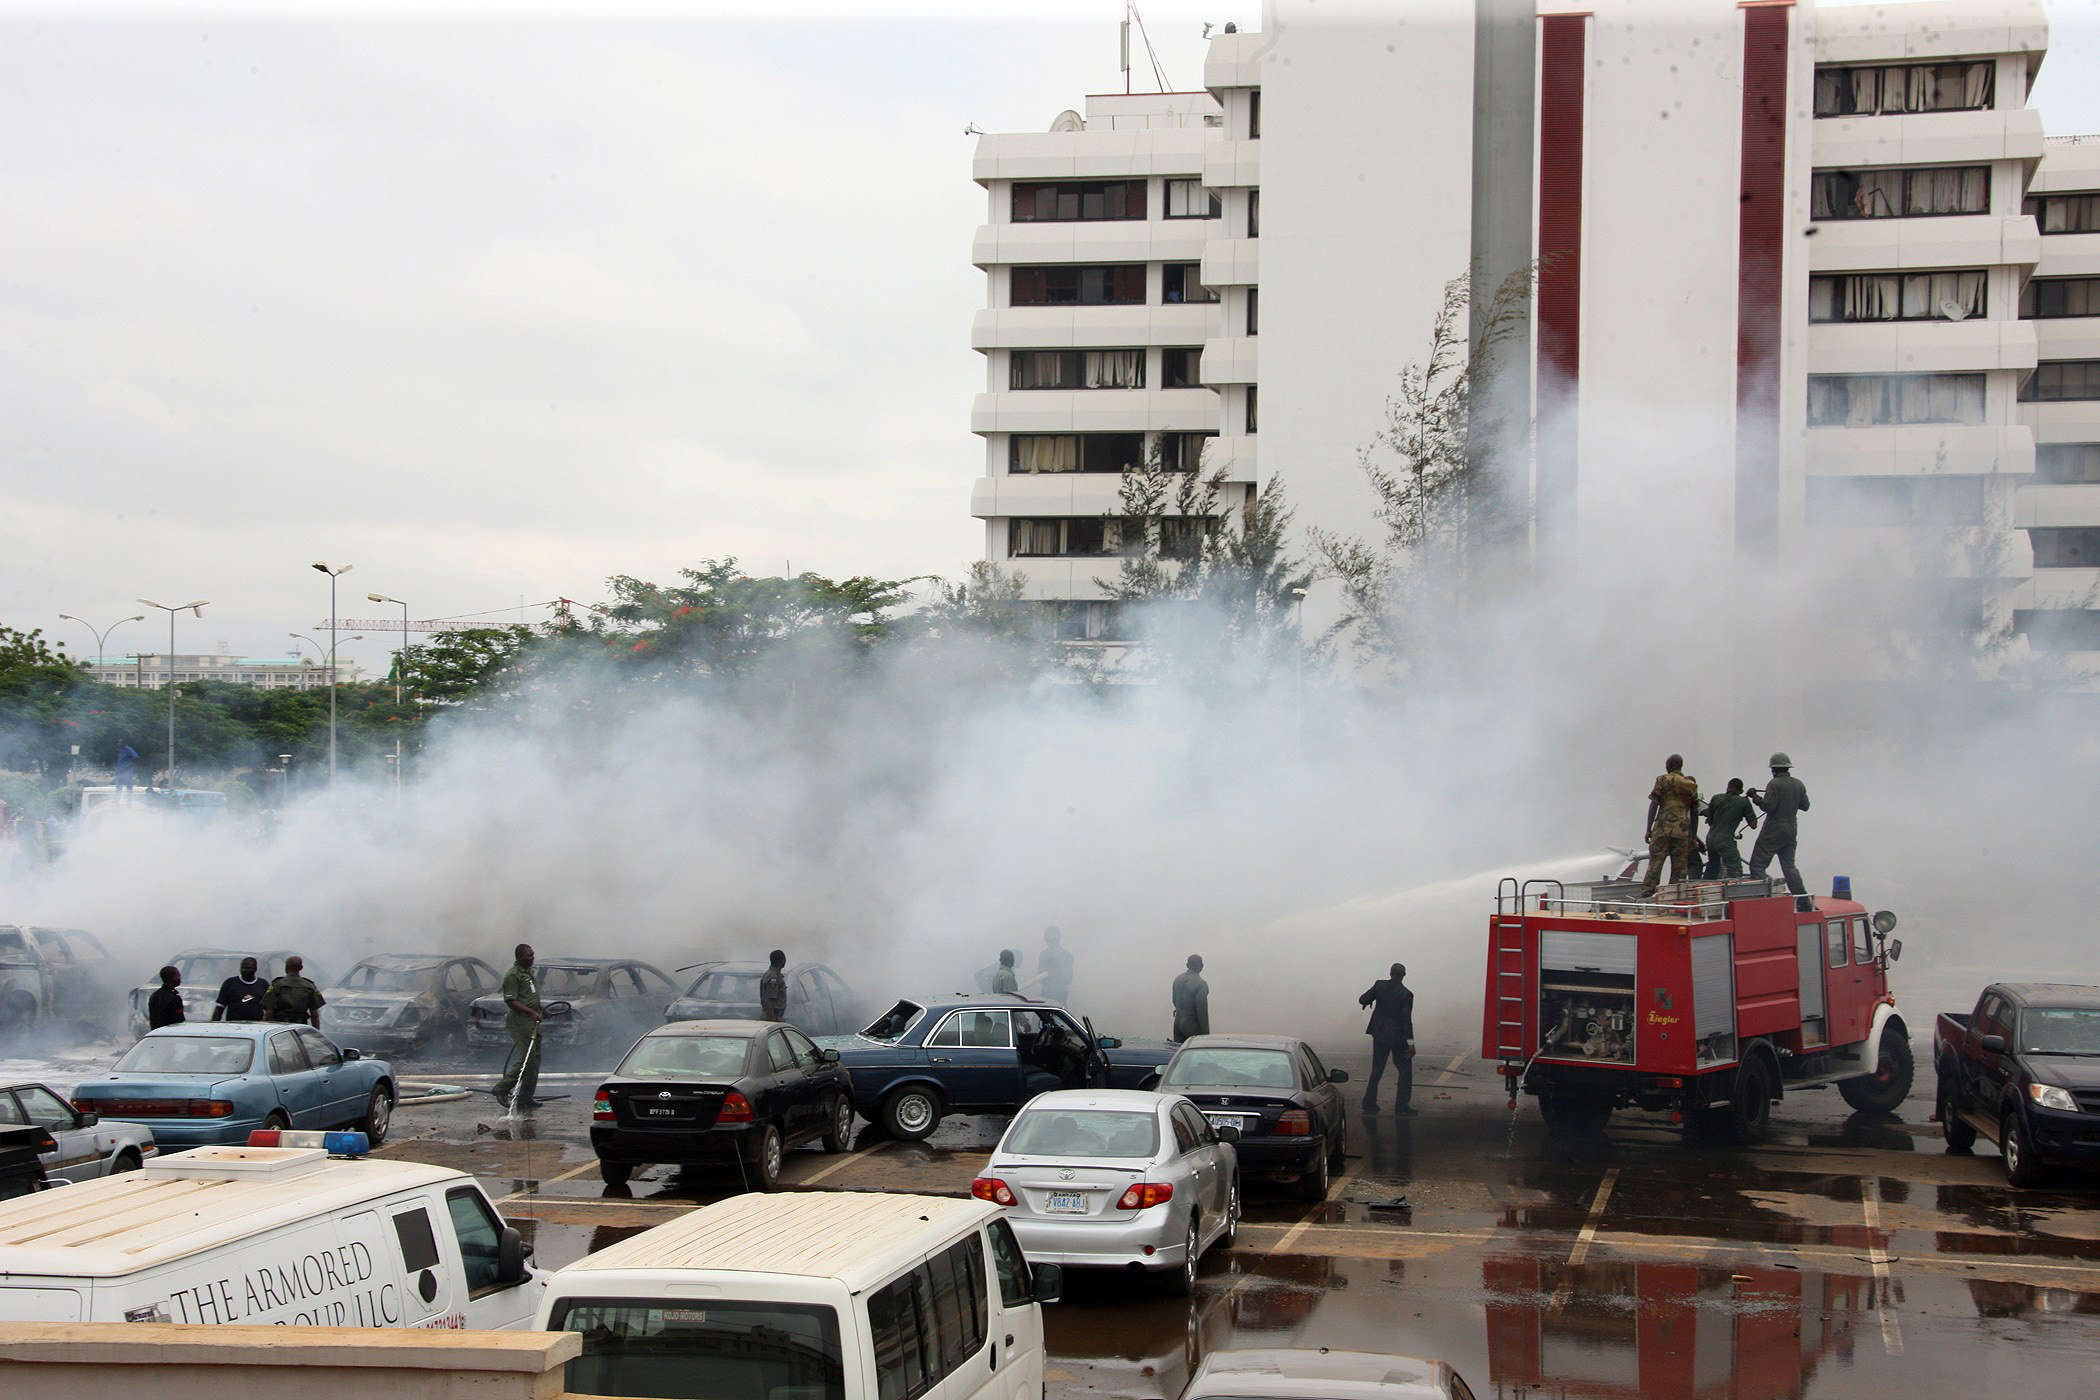 Firefighters try to extinguish a fire after a bomb blast at the parking lot of police headquaters in Abuja on June 16, 2011. The bomb killed two people and damaged several vehicles. Nigerian police suspect the radical Islamic sect Boko to be behind the "suicide" bombing. The Islamist Boko Haram sect on June 15, 2011 threatened "fiercer" attacks and said it would not enter into talks with the government, which it had earlier proposed. AFP PHOTO/ SUNDAY AGHAEZE (Photo credit should read Sunday Aghaeze/AFP/Getty Images)